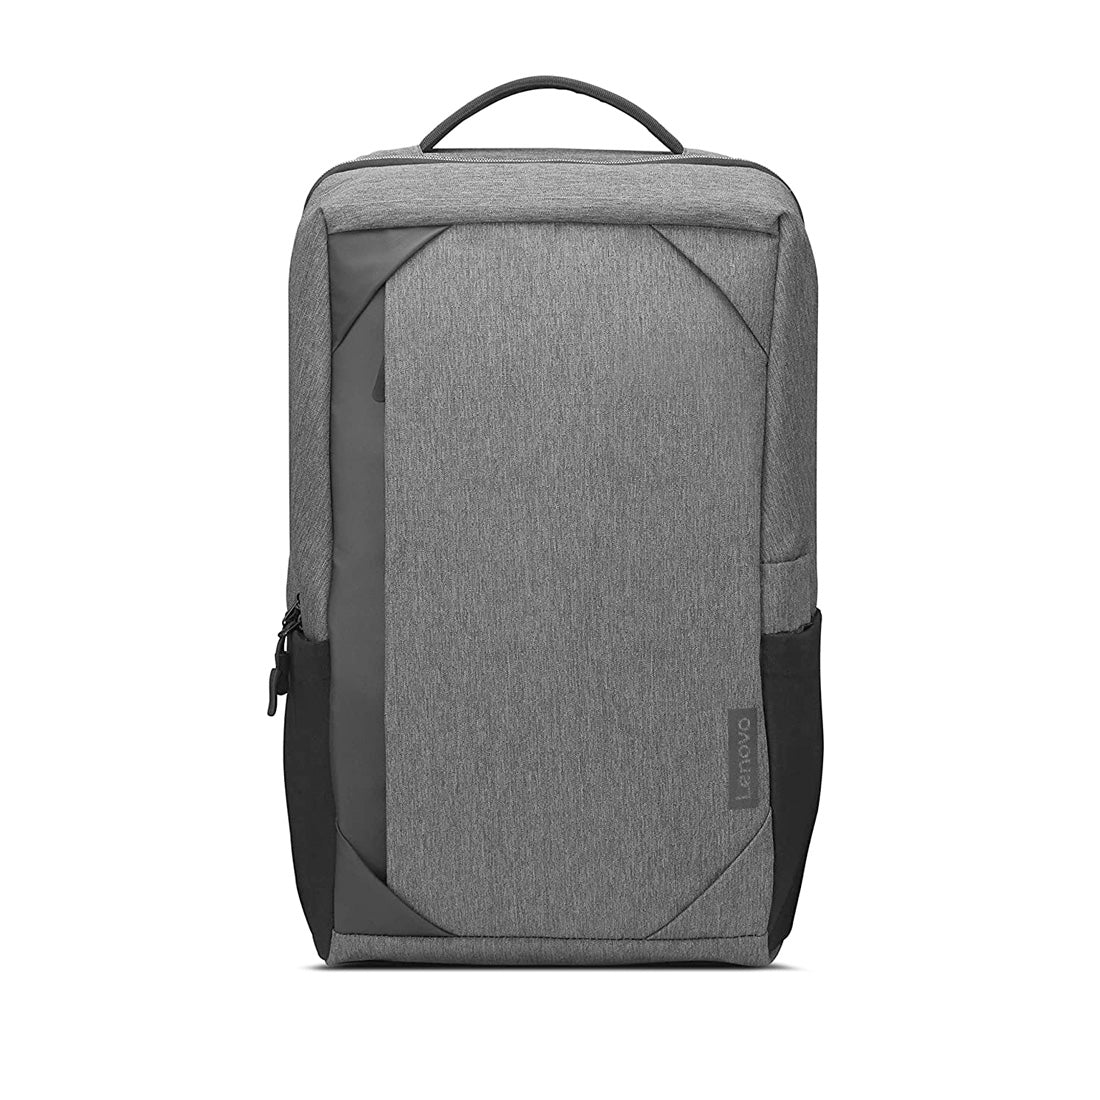 Lenovo Urban Backpack B530 for 15.6-inch Laptops with Water-Repellent Material and Luggage Strap